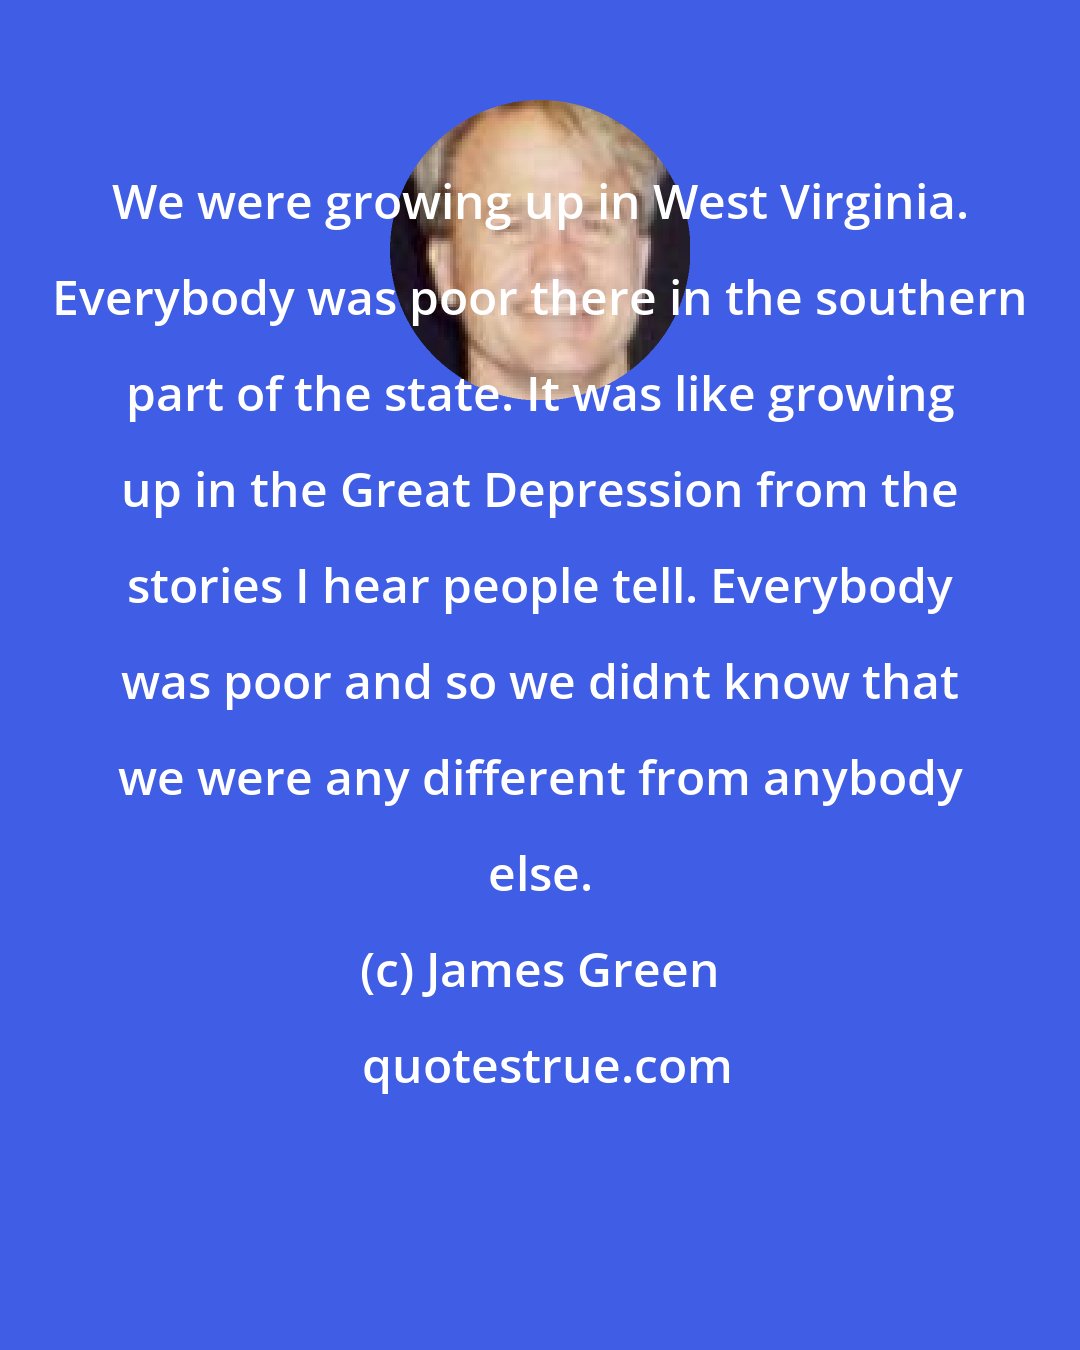 James Green: We were growing up in West Virginia. Everybody was poor there in the southern part of the state. It was like growing up in the Great Depression from the stories I hear people tell. Everybody was poor and so we didnt know that we were any different from anybody else.